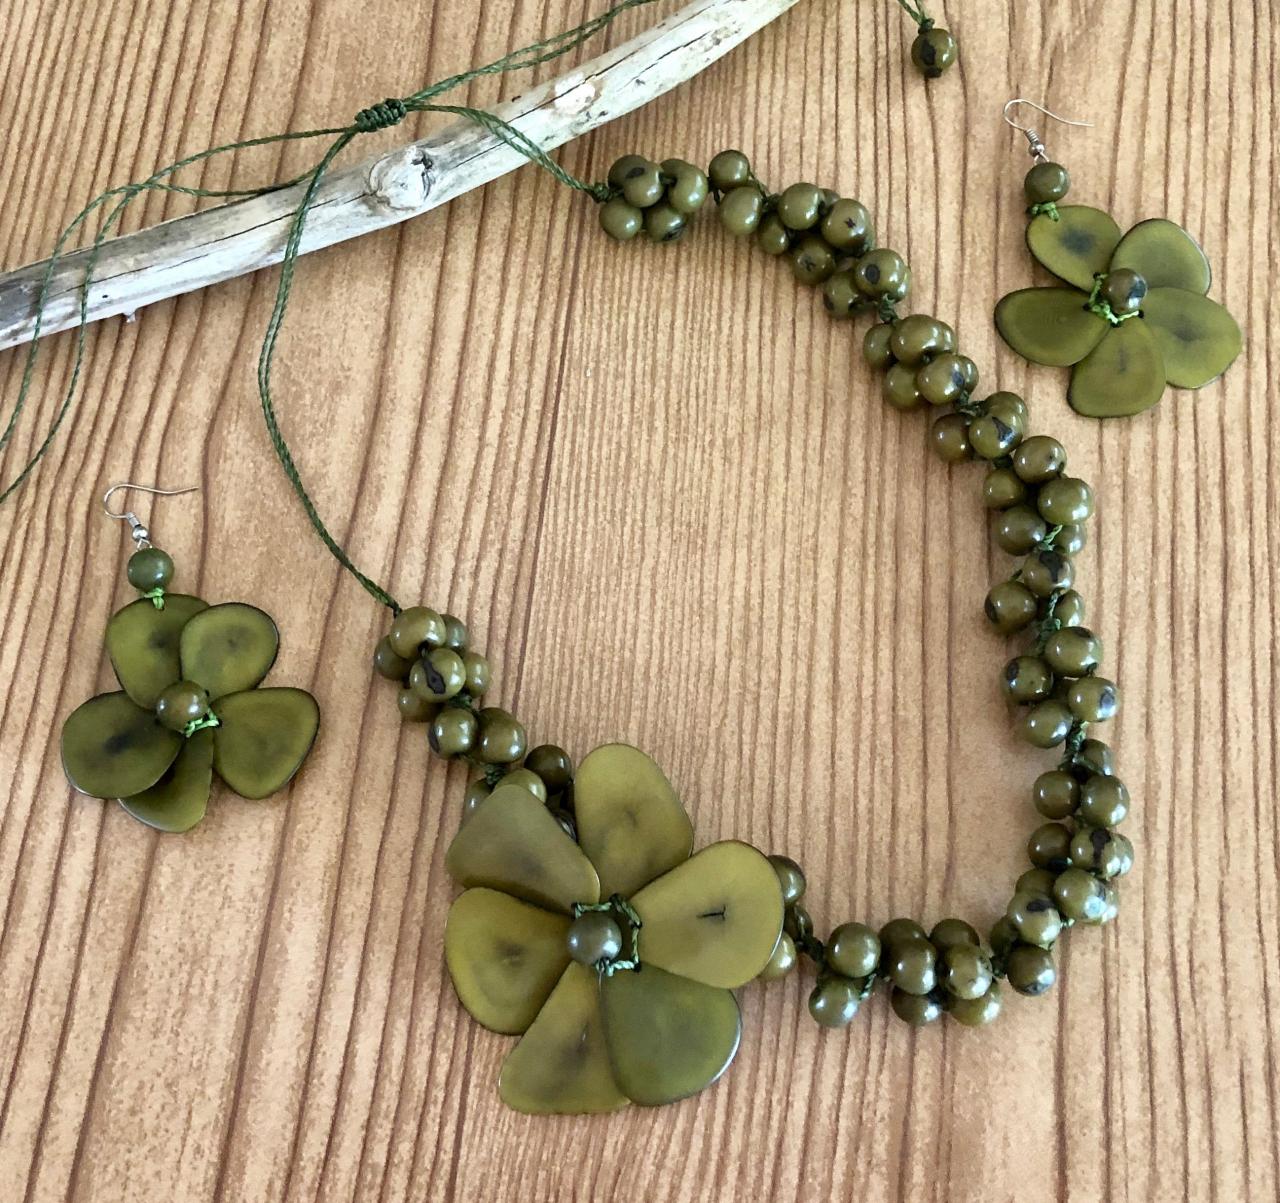 Olive Green Tagua Necklace And Earrings, Açaí Seeds Necklace, Two Strand Necklace, Statement Necklace, Vegan Necklace, Flower Necklace, Mom